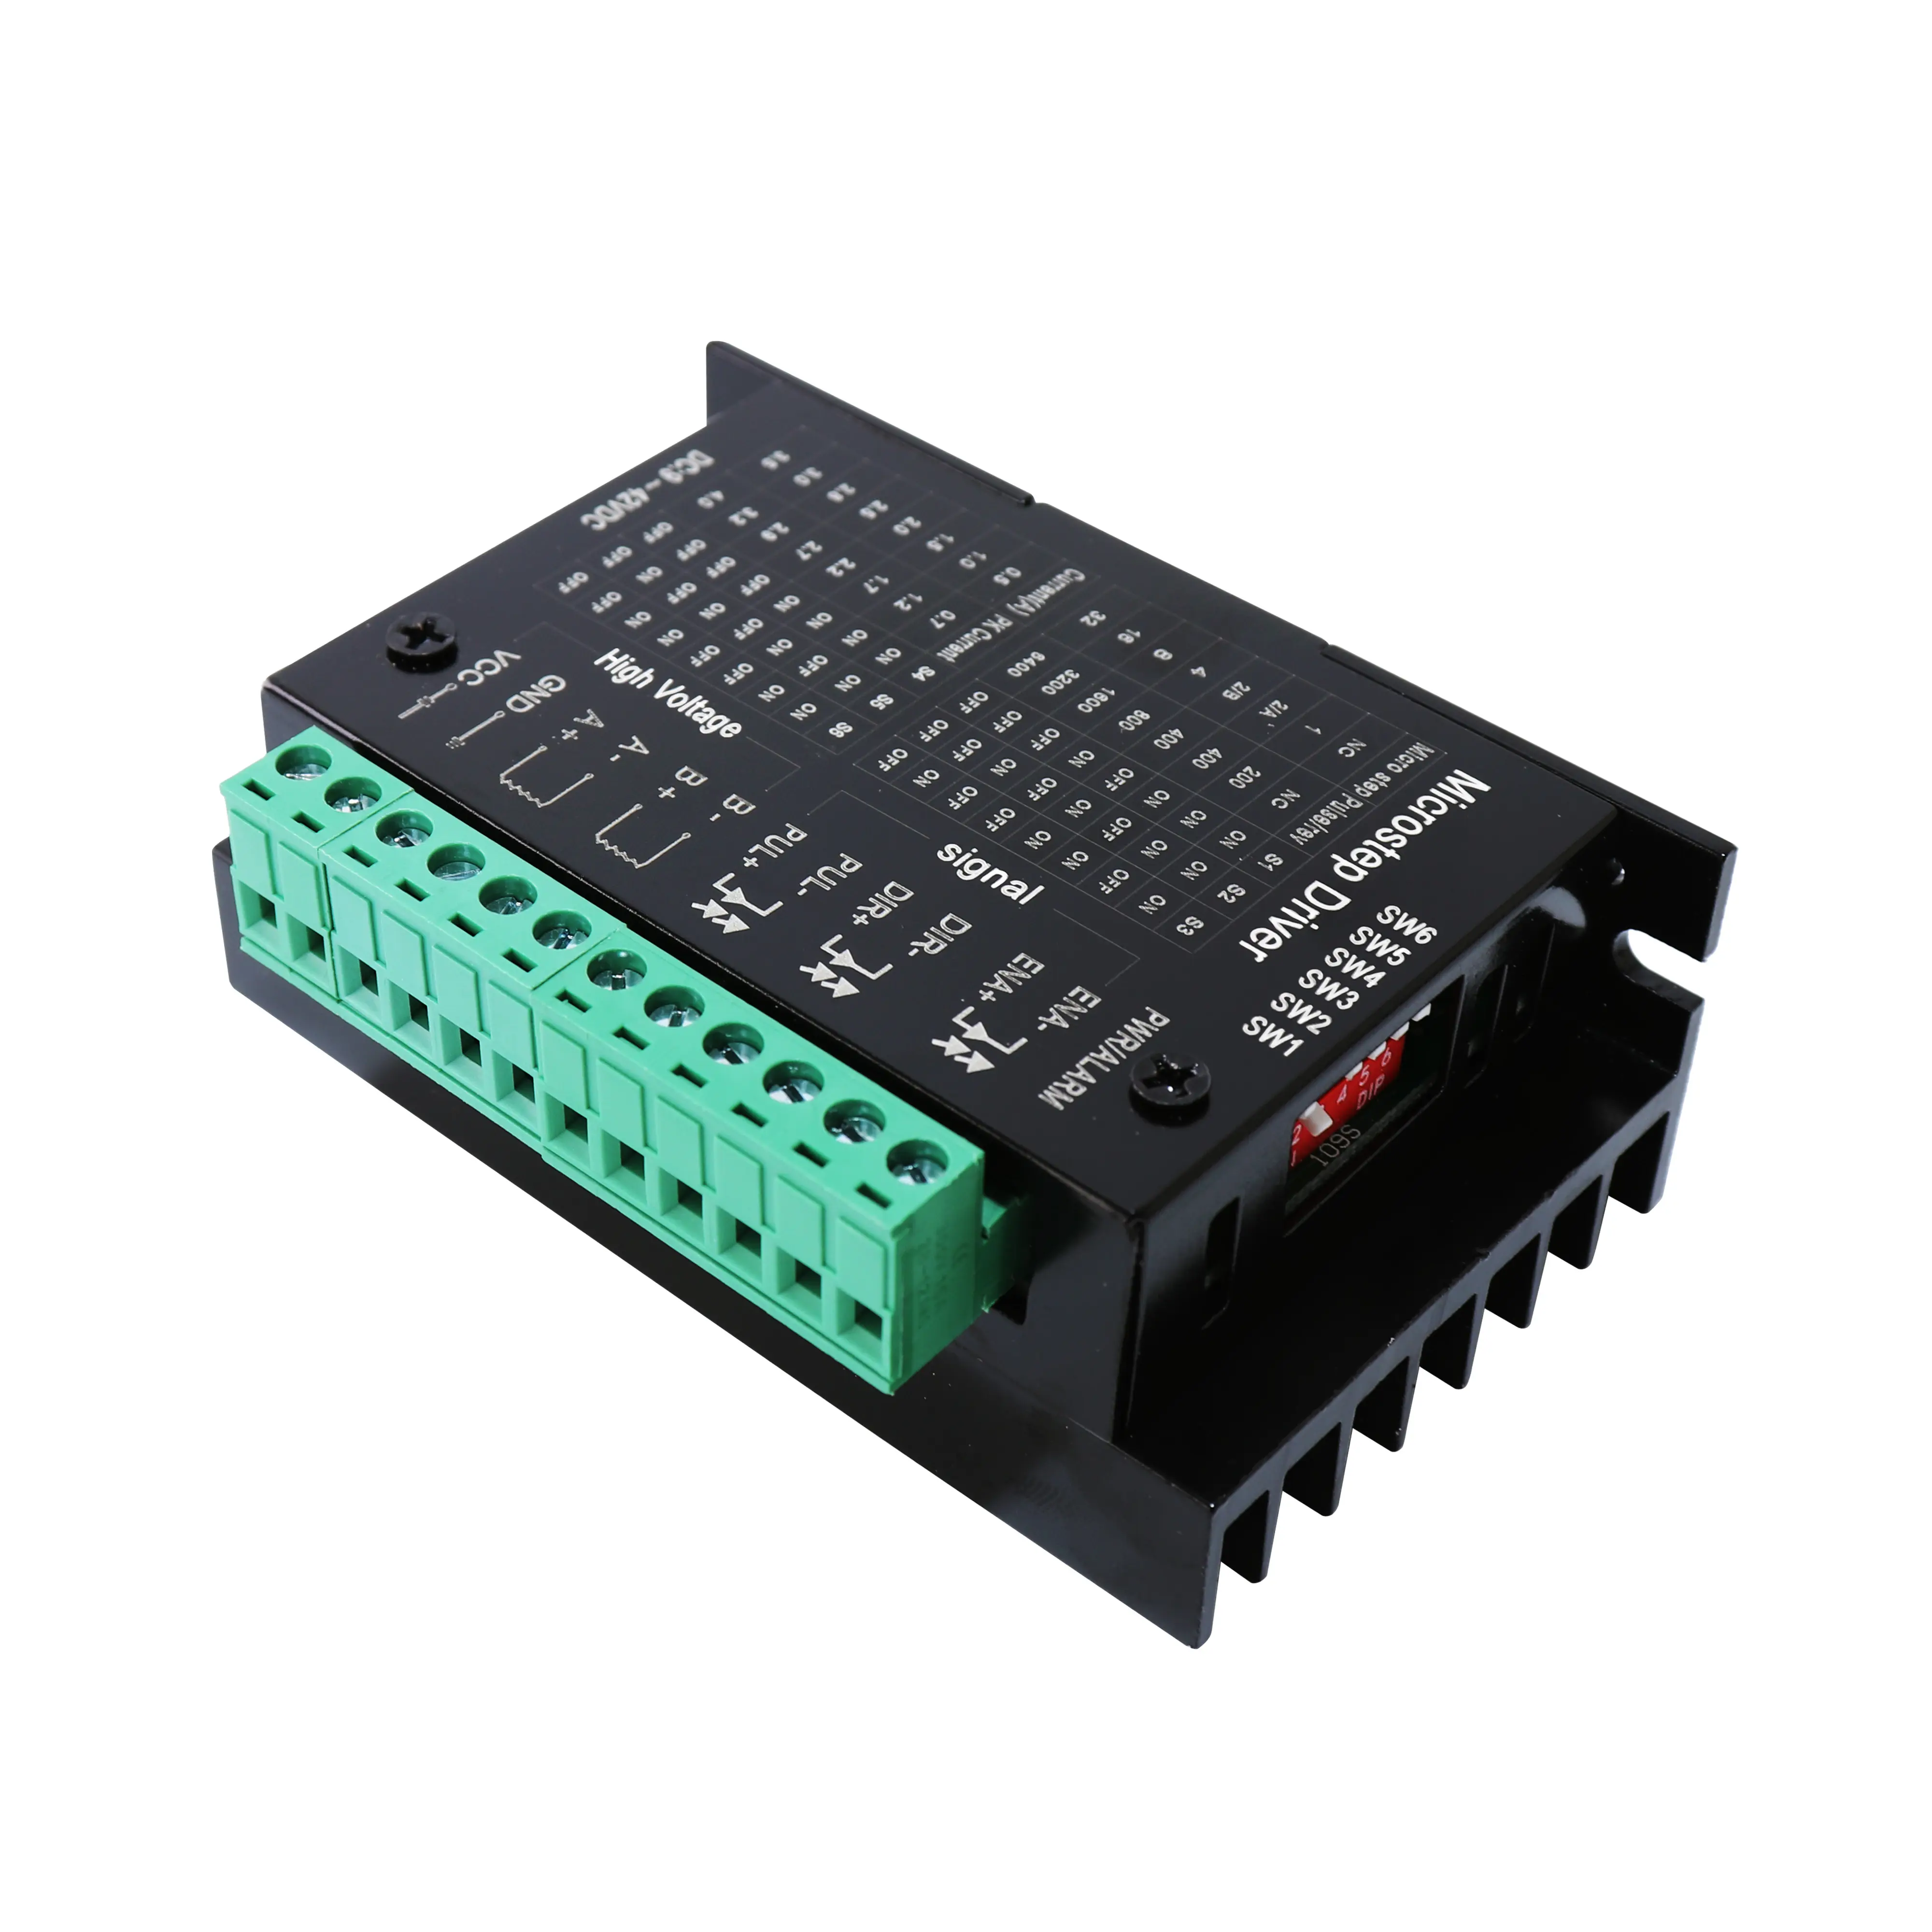 HanBuild Tb6600 stepper motor driver for 42 57 Series motor 2phase 4.0A for 3D printer and CNC milling machine